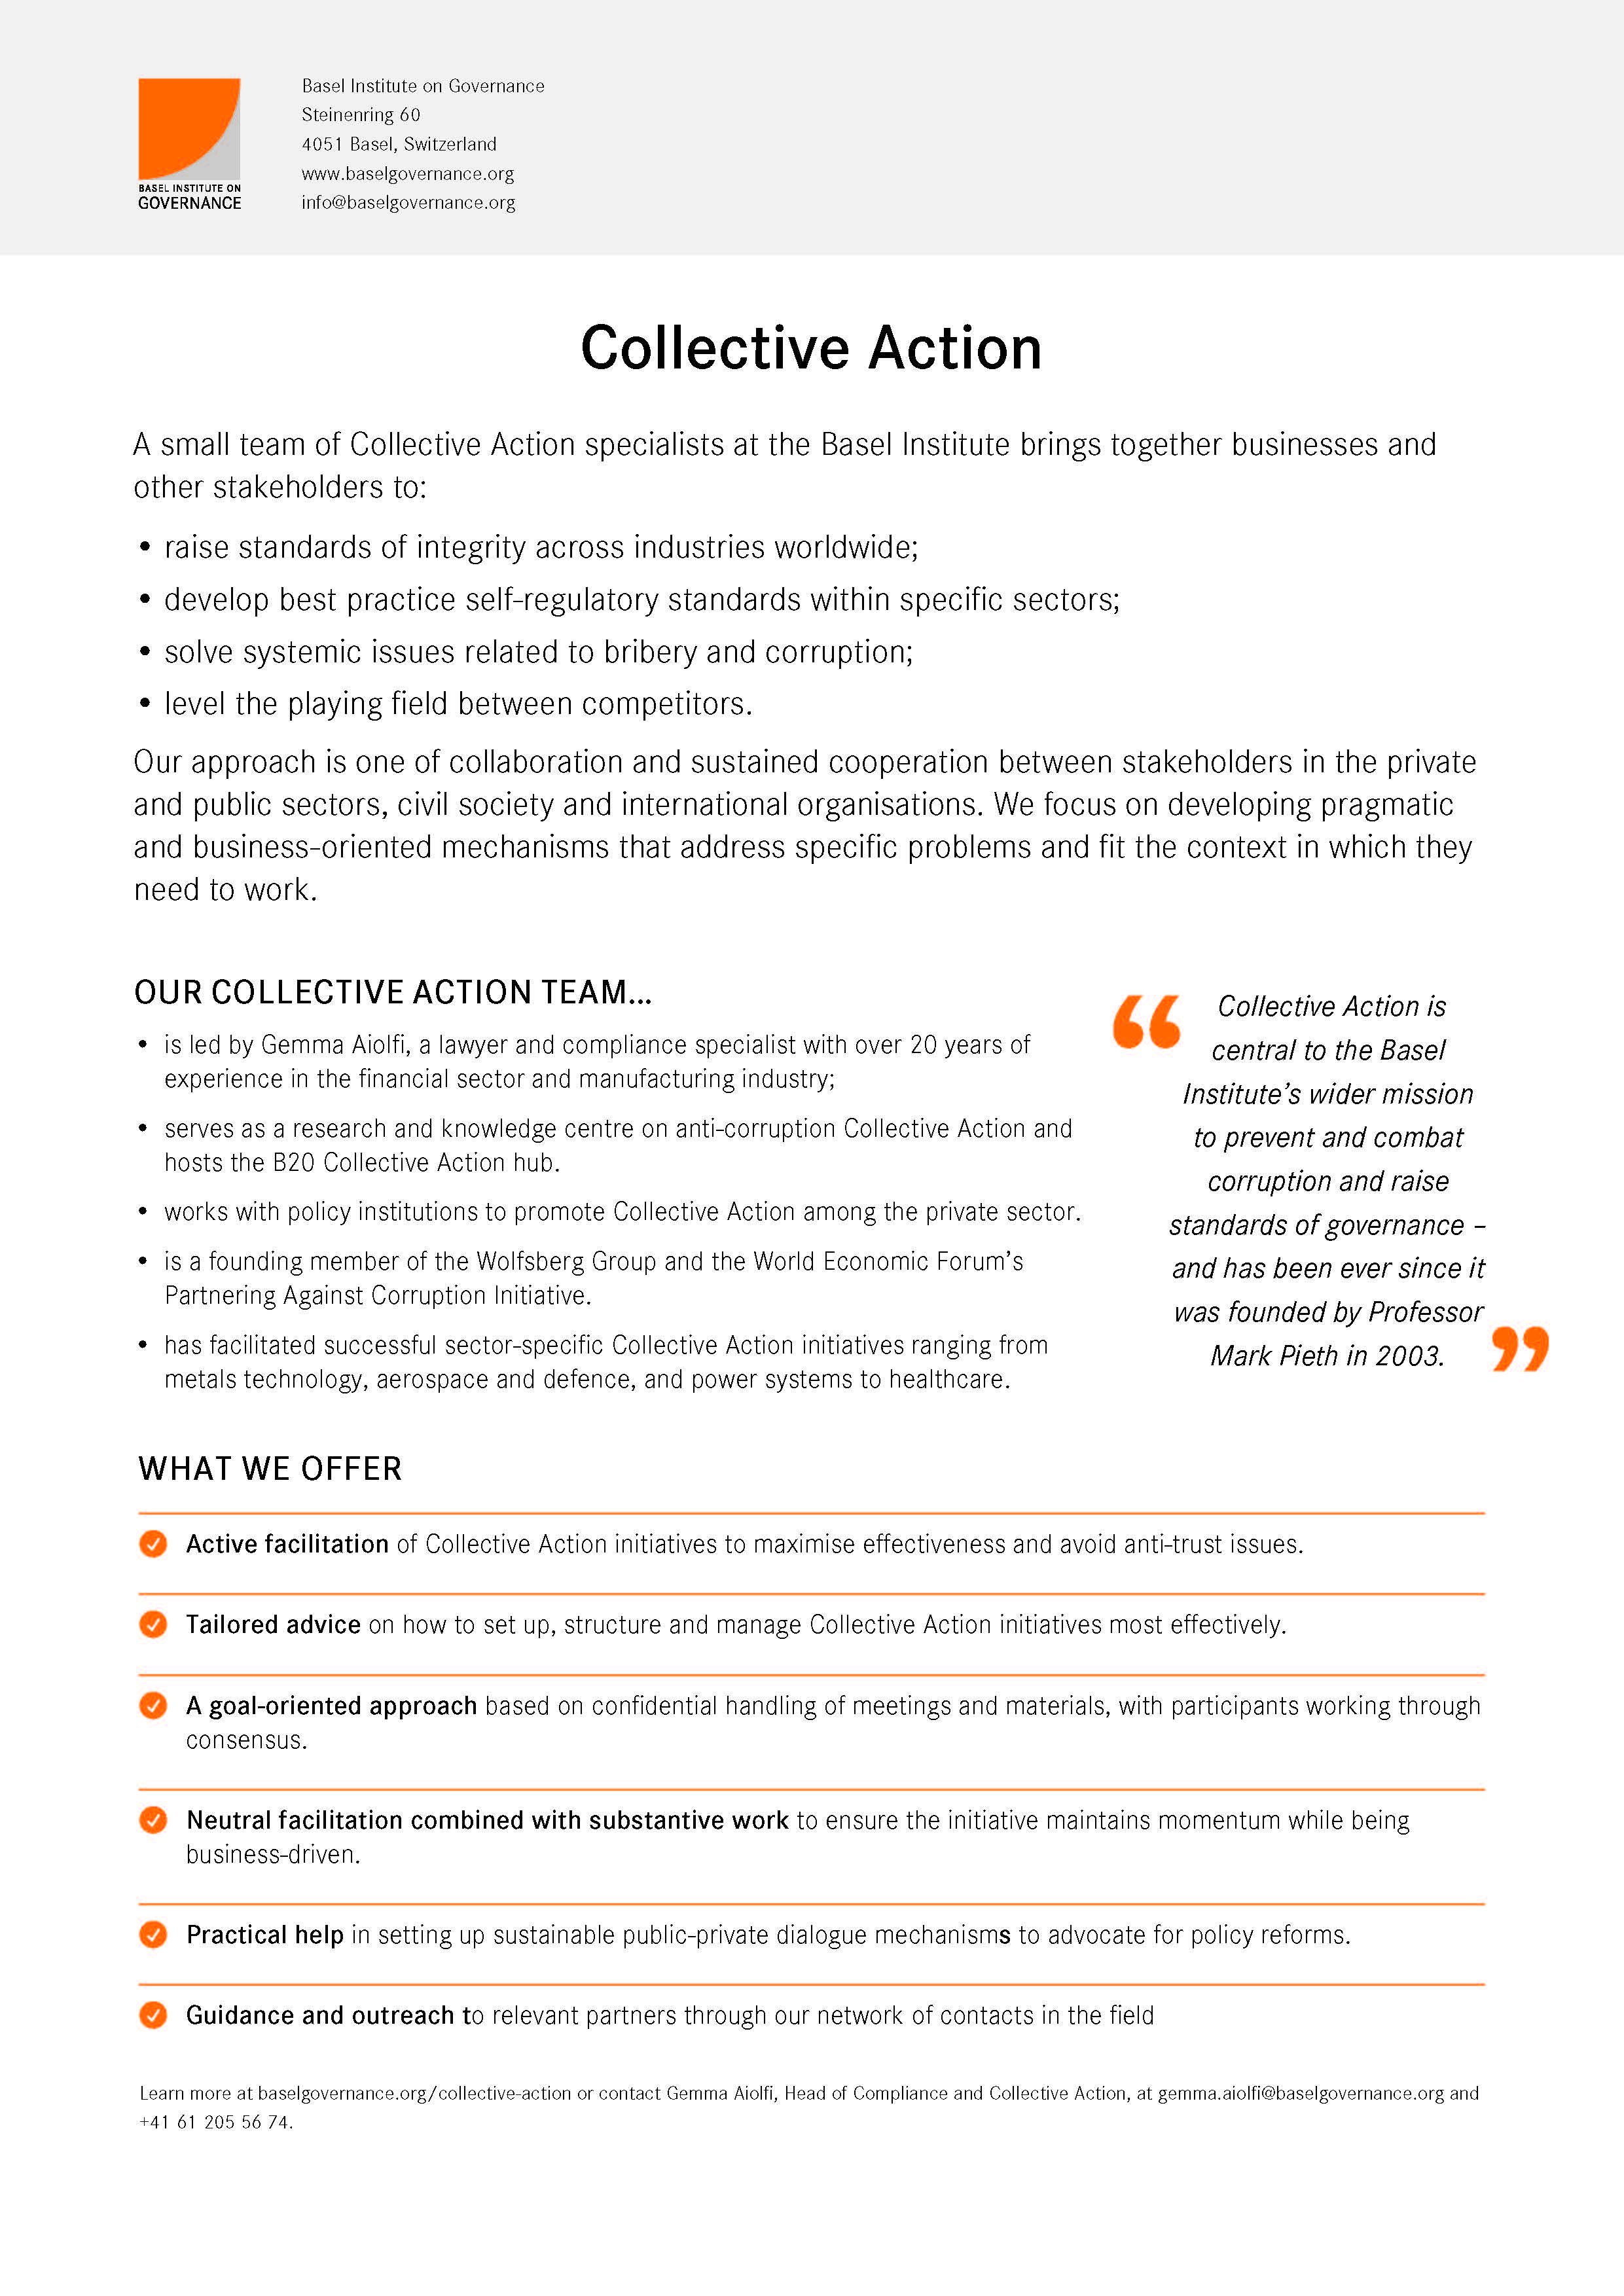 Collective Action flyer